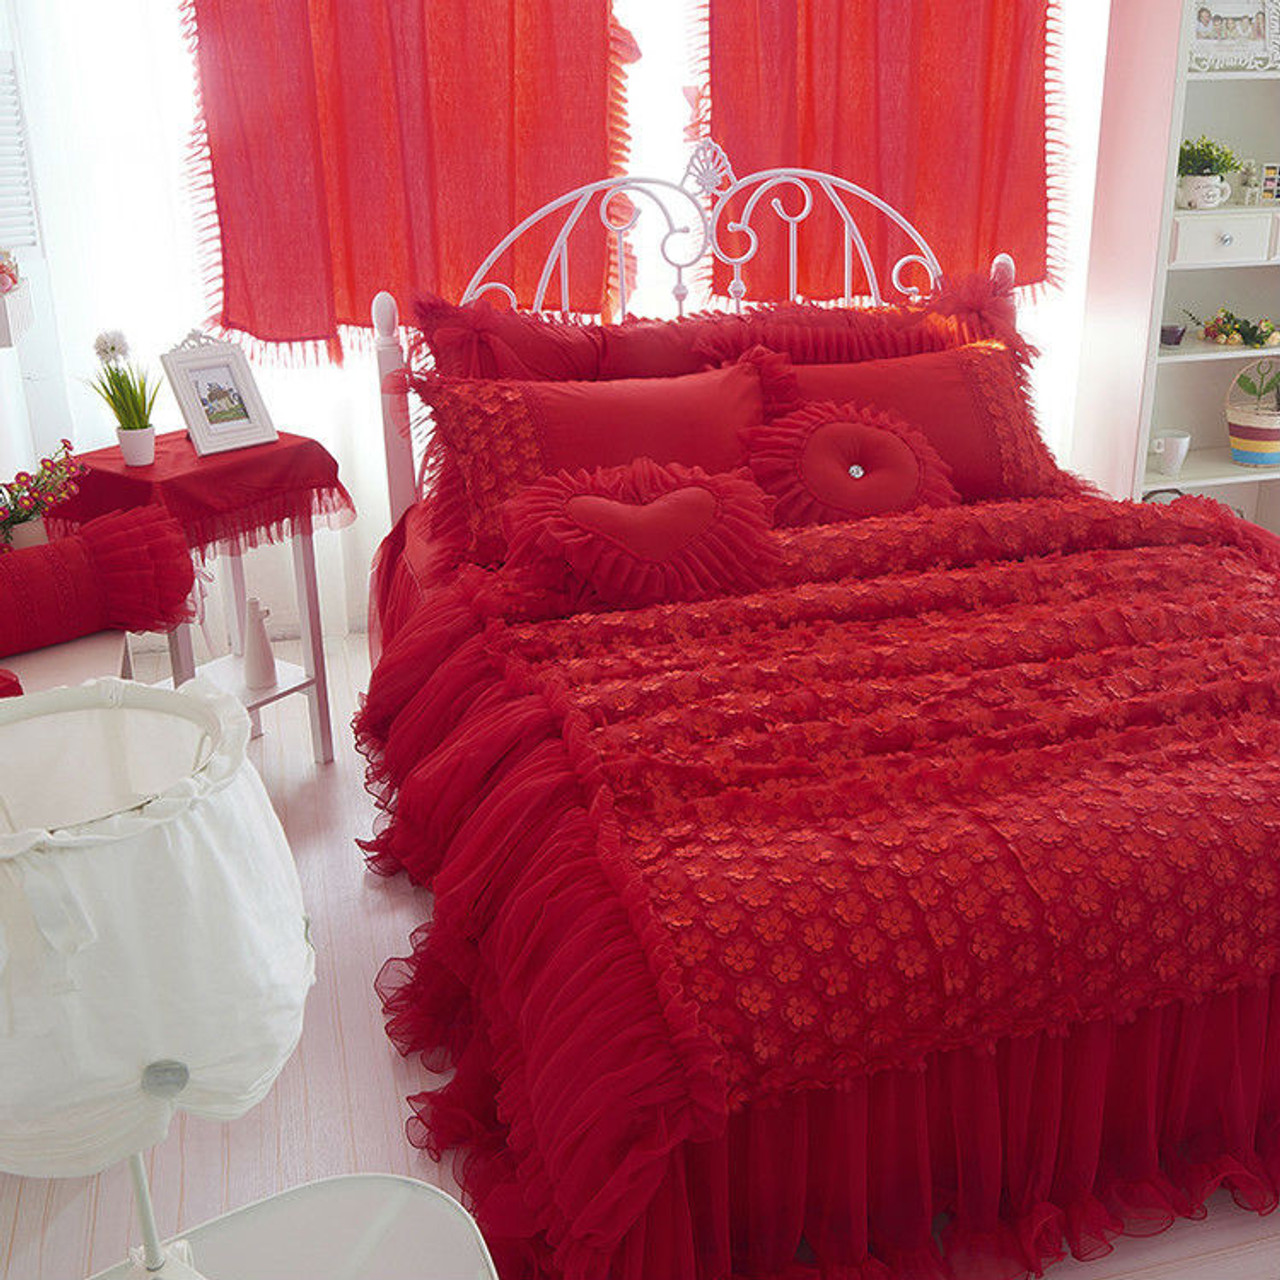 Wedding Red Color Luxury Lace Bedding Sets Twin Full Queen King